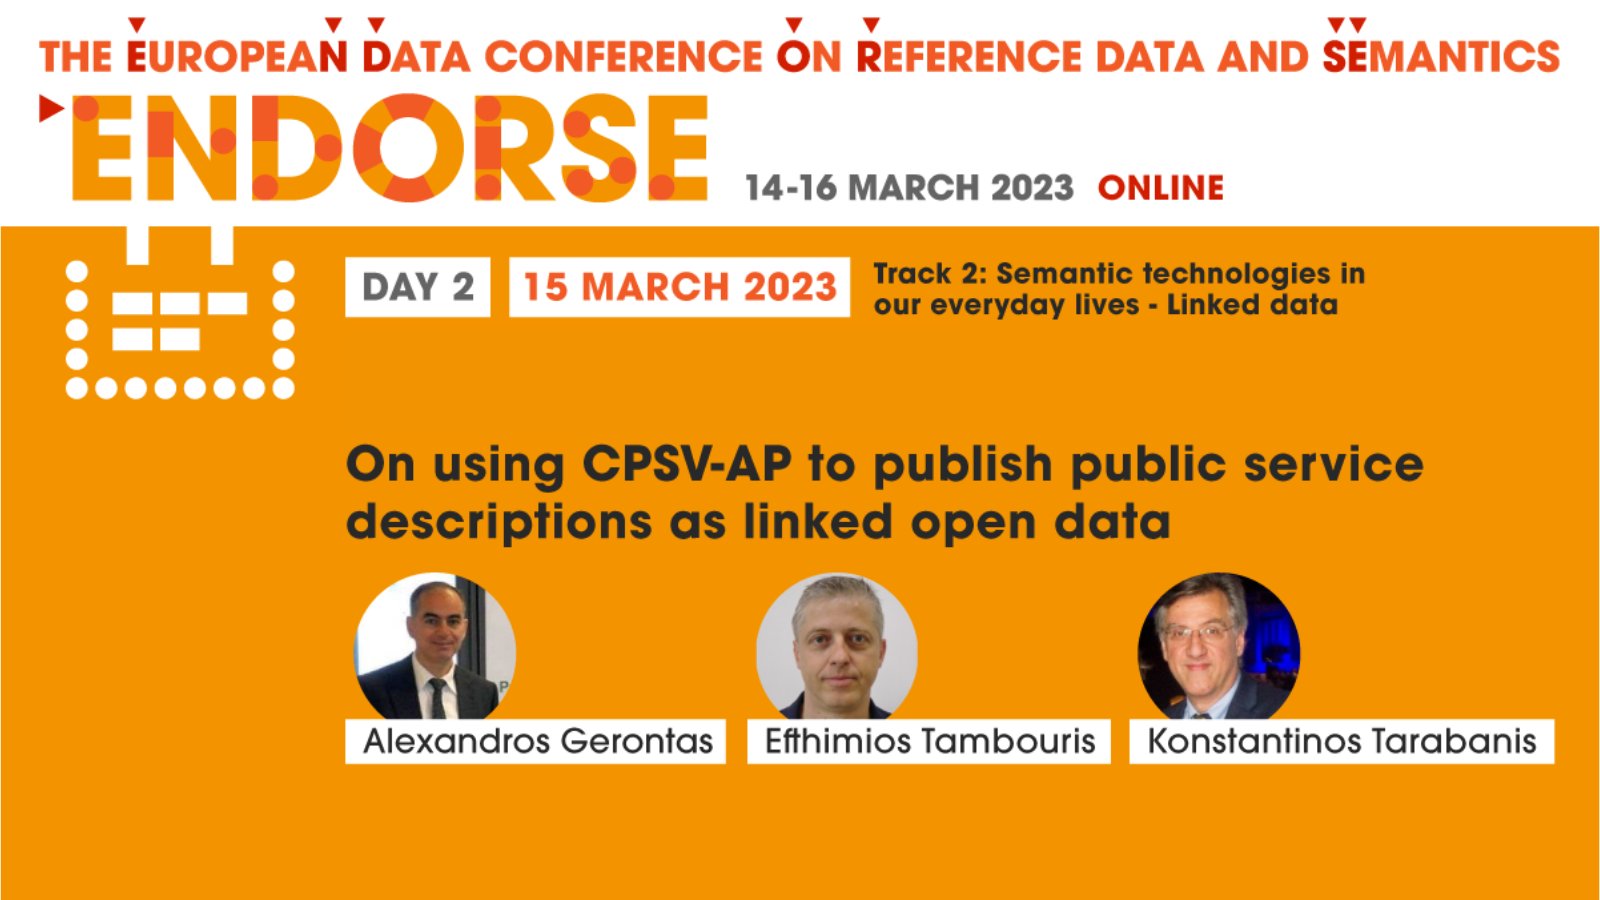 inGOV presentation at the EuropeaN Data conference On Reference data